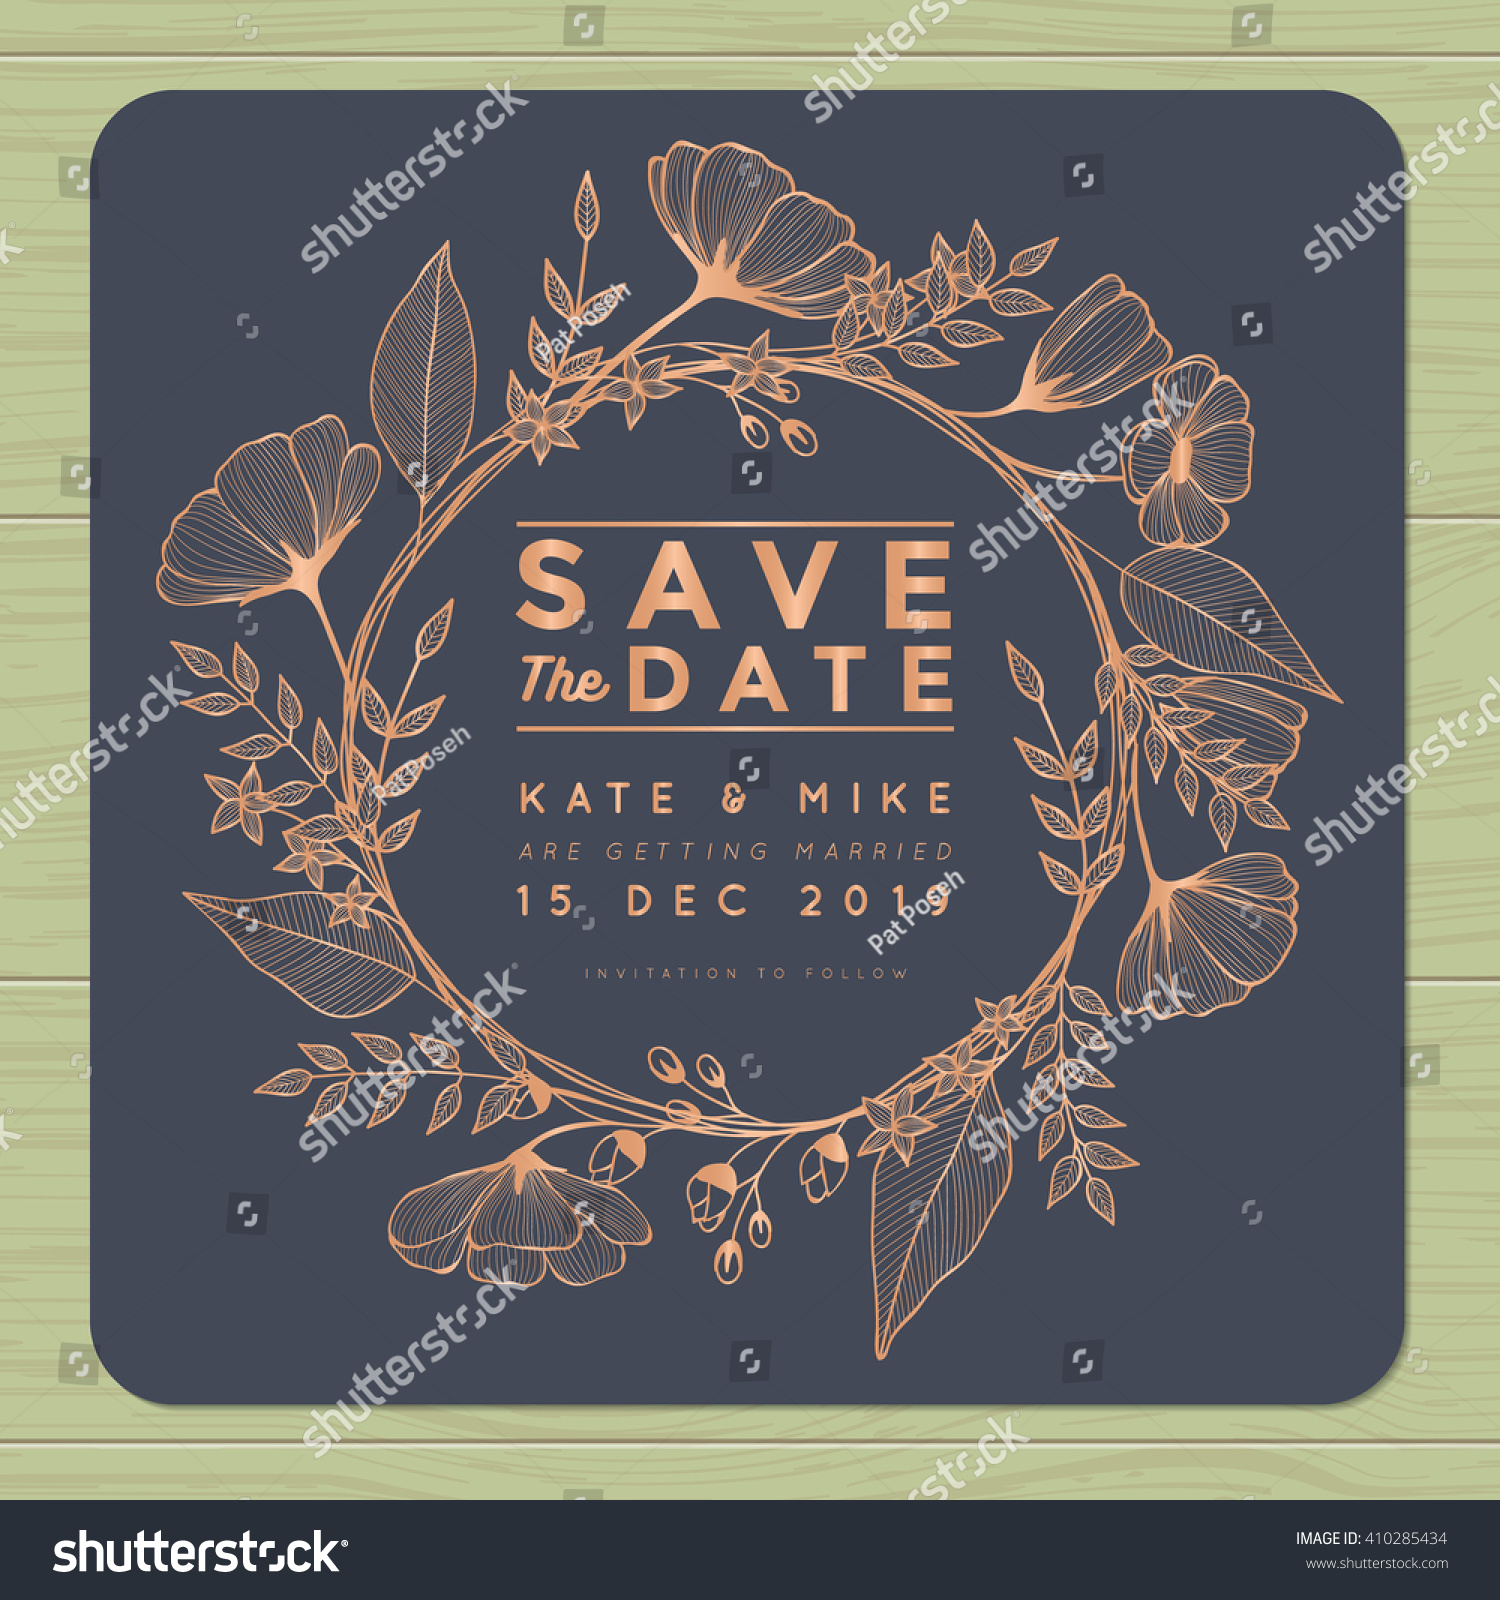 Save the date, wedding invitation card with wreath flower template. Flower floral background. Vector illustration. #410285434